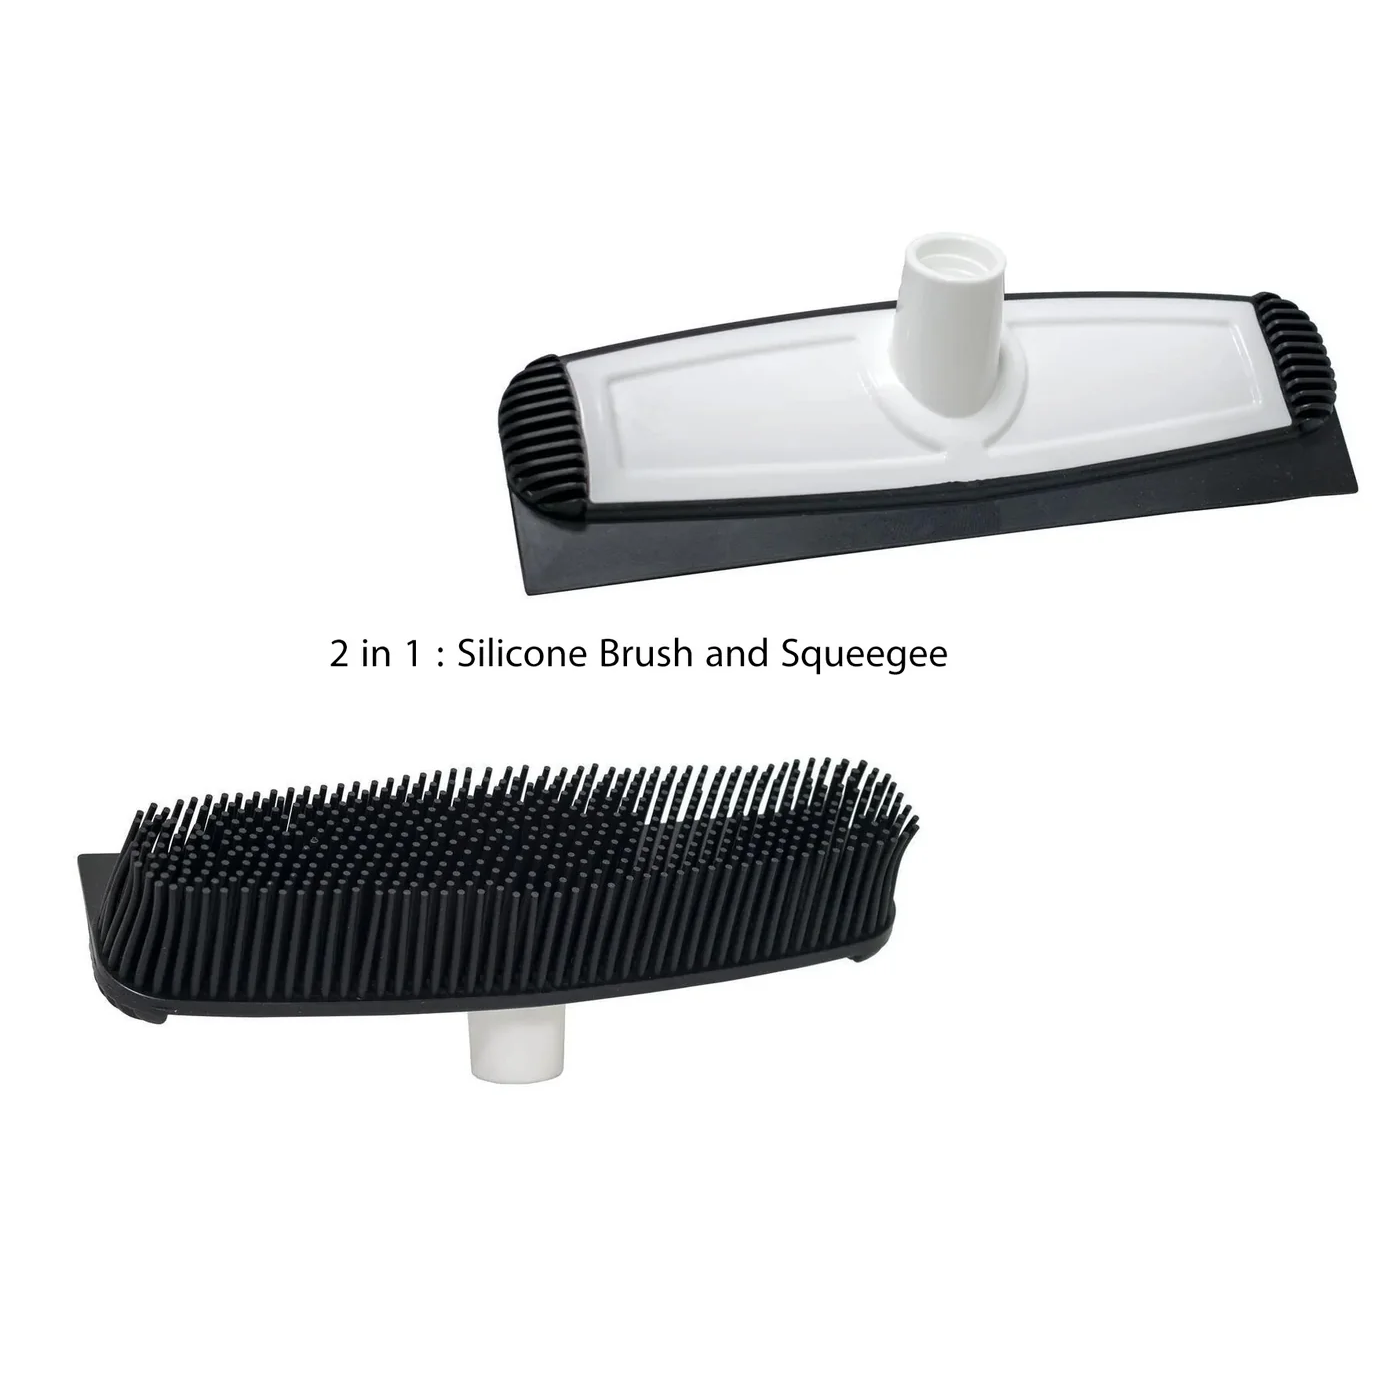 2 in 1 Deluxe Silicone Brush and Squeegee  - Lunaz Shop